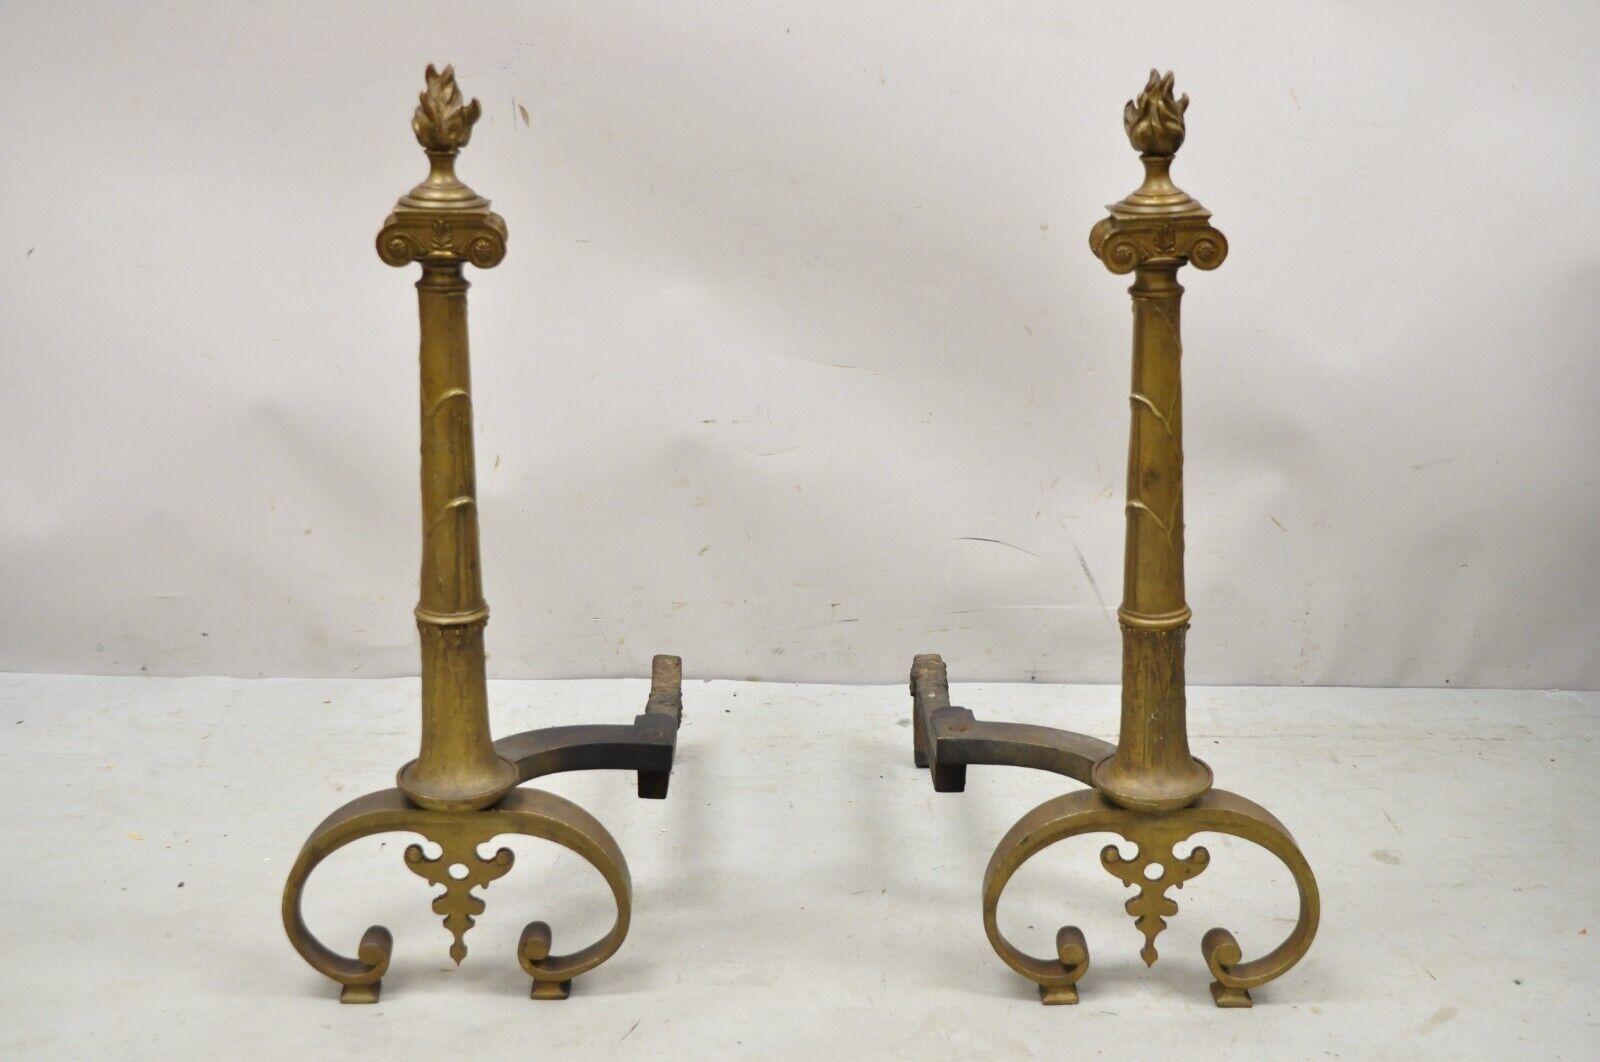 Antique French Empire Renaissance Style Torch Flame Finial Bronze Andirons - a Pair. Circa Early to Mid 1900s. Measurements: 25